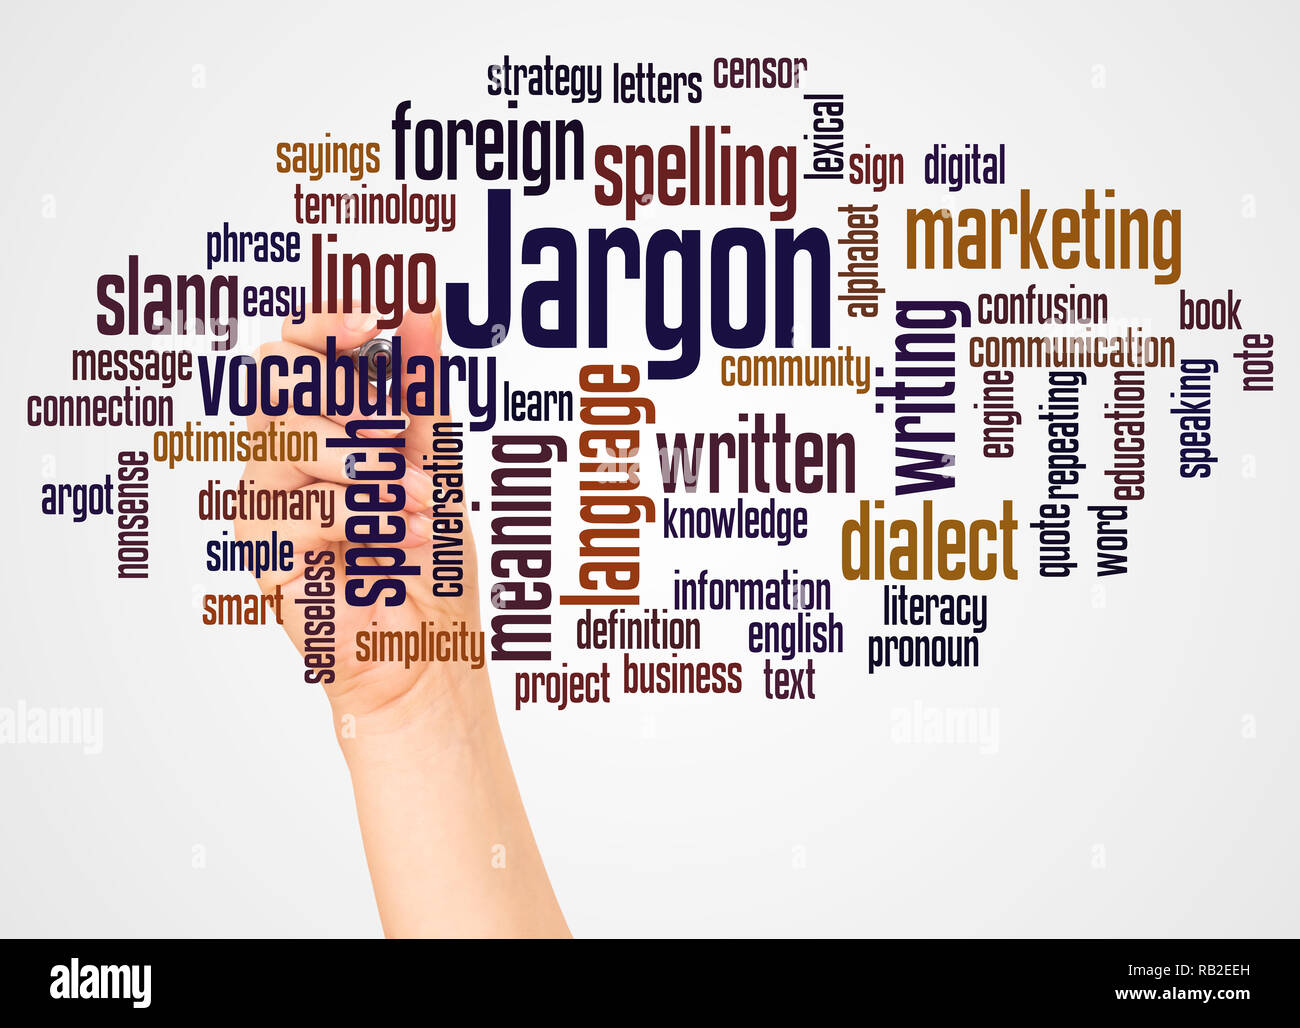 Jargon word cloud and hand with marker concept on white background. Stock Photo